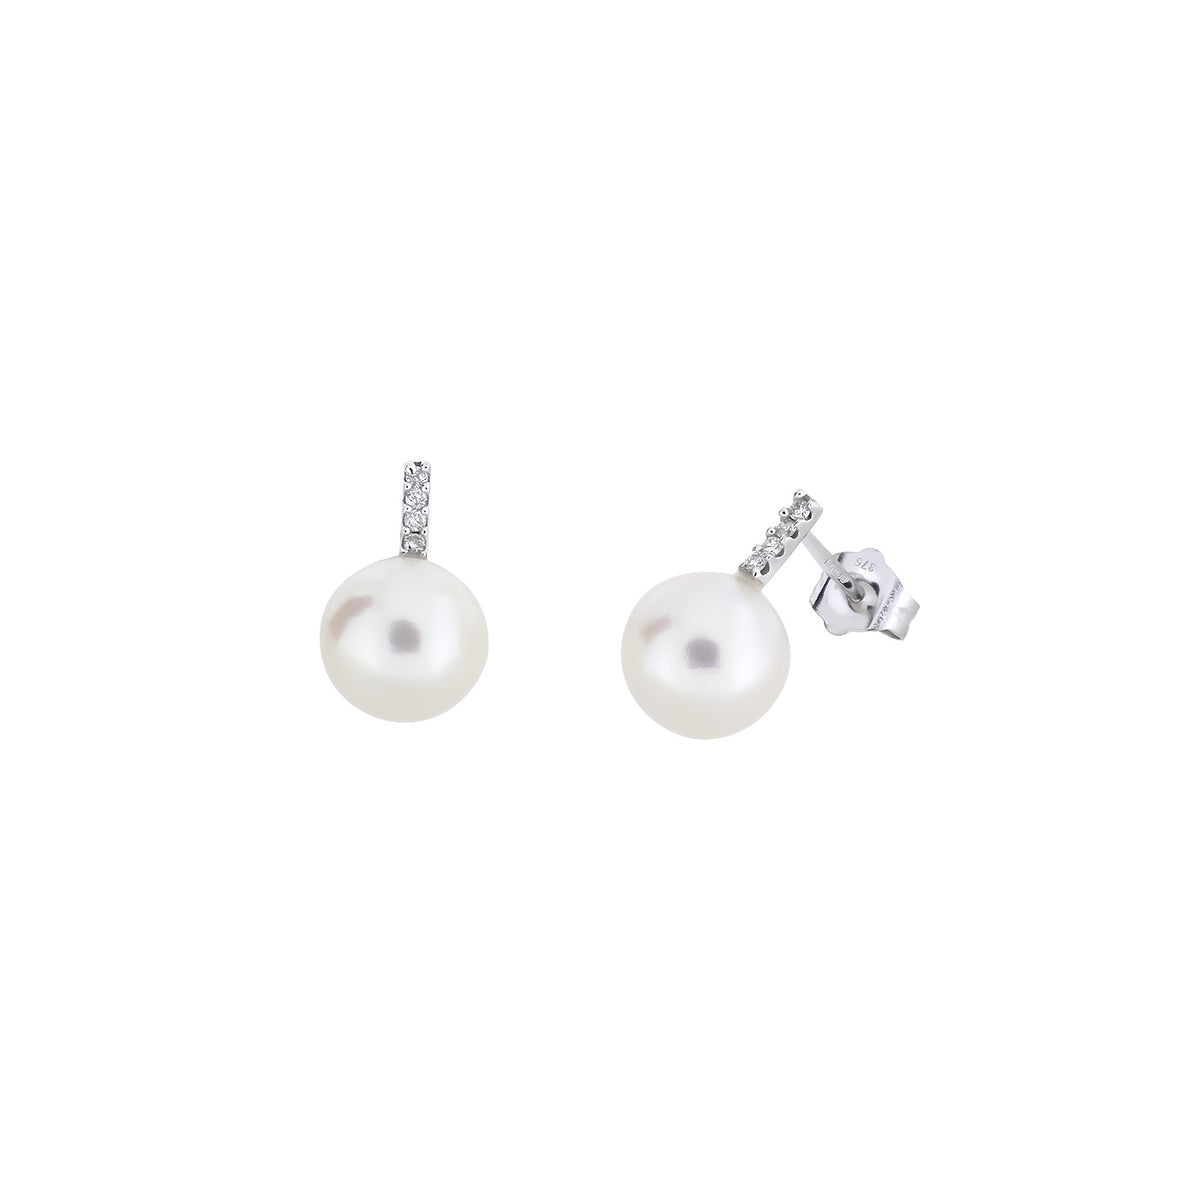 9ct White Gold, Pearl and Diamond Stud Earrings